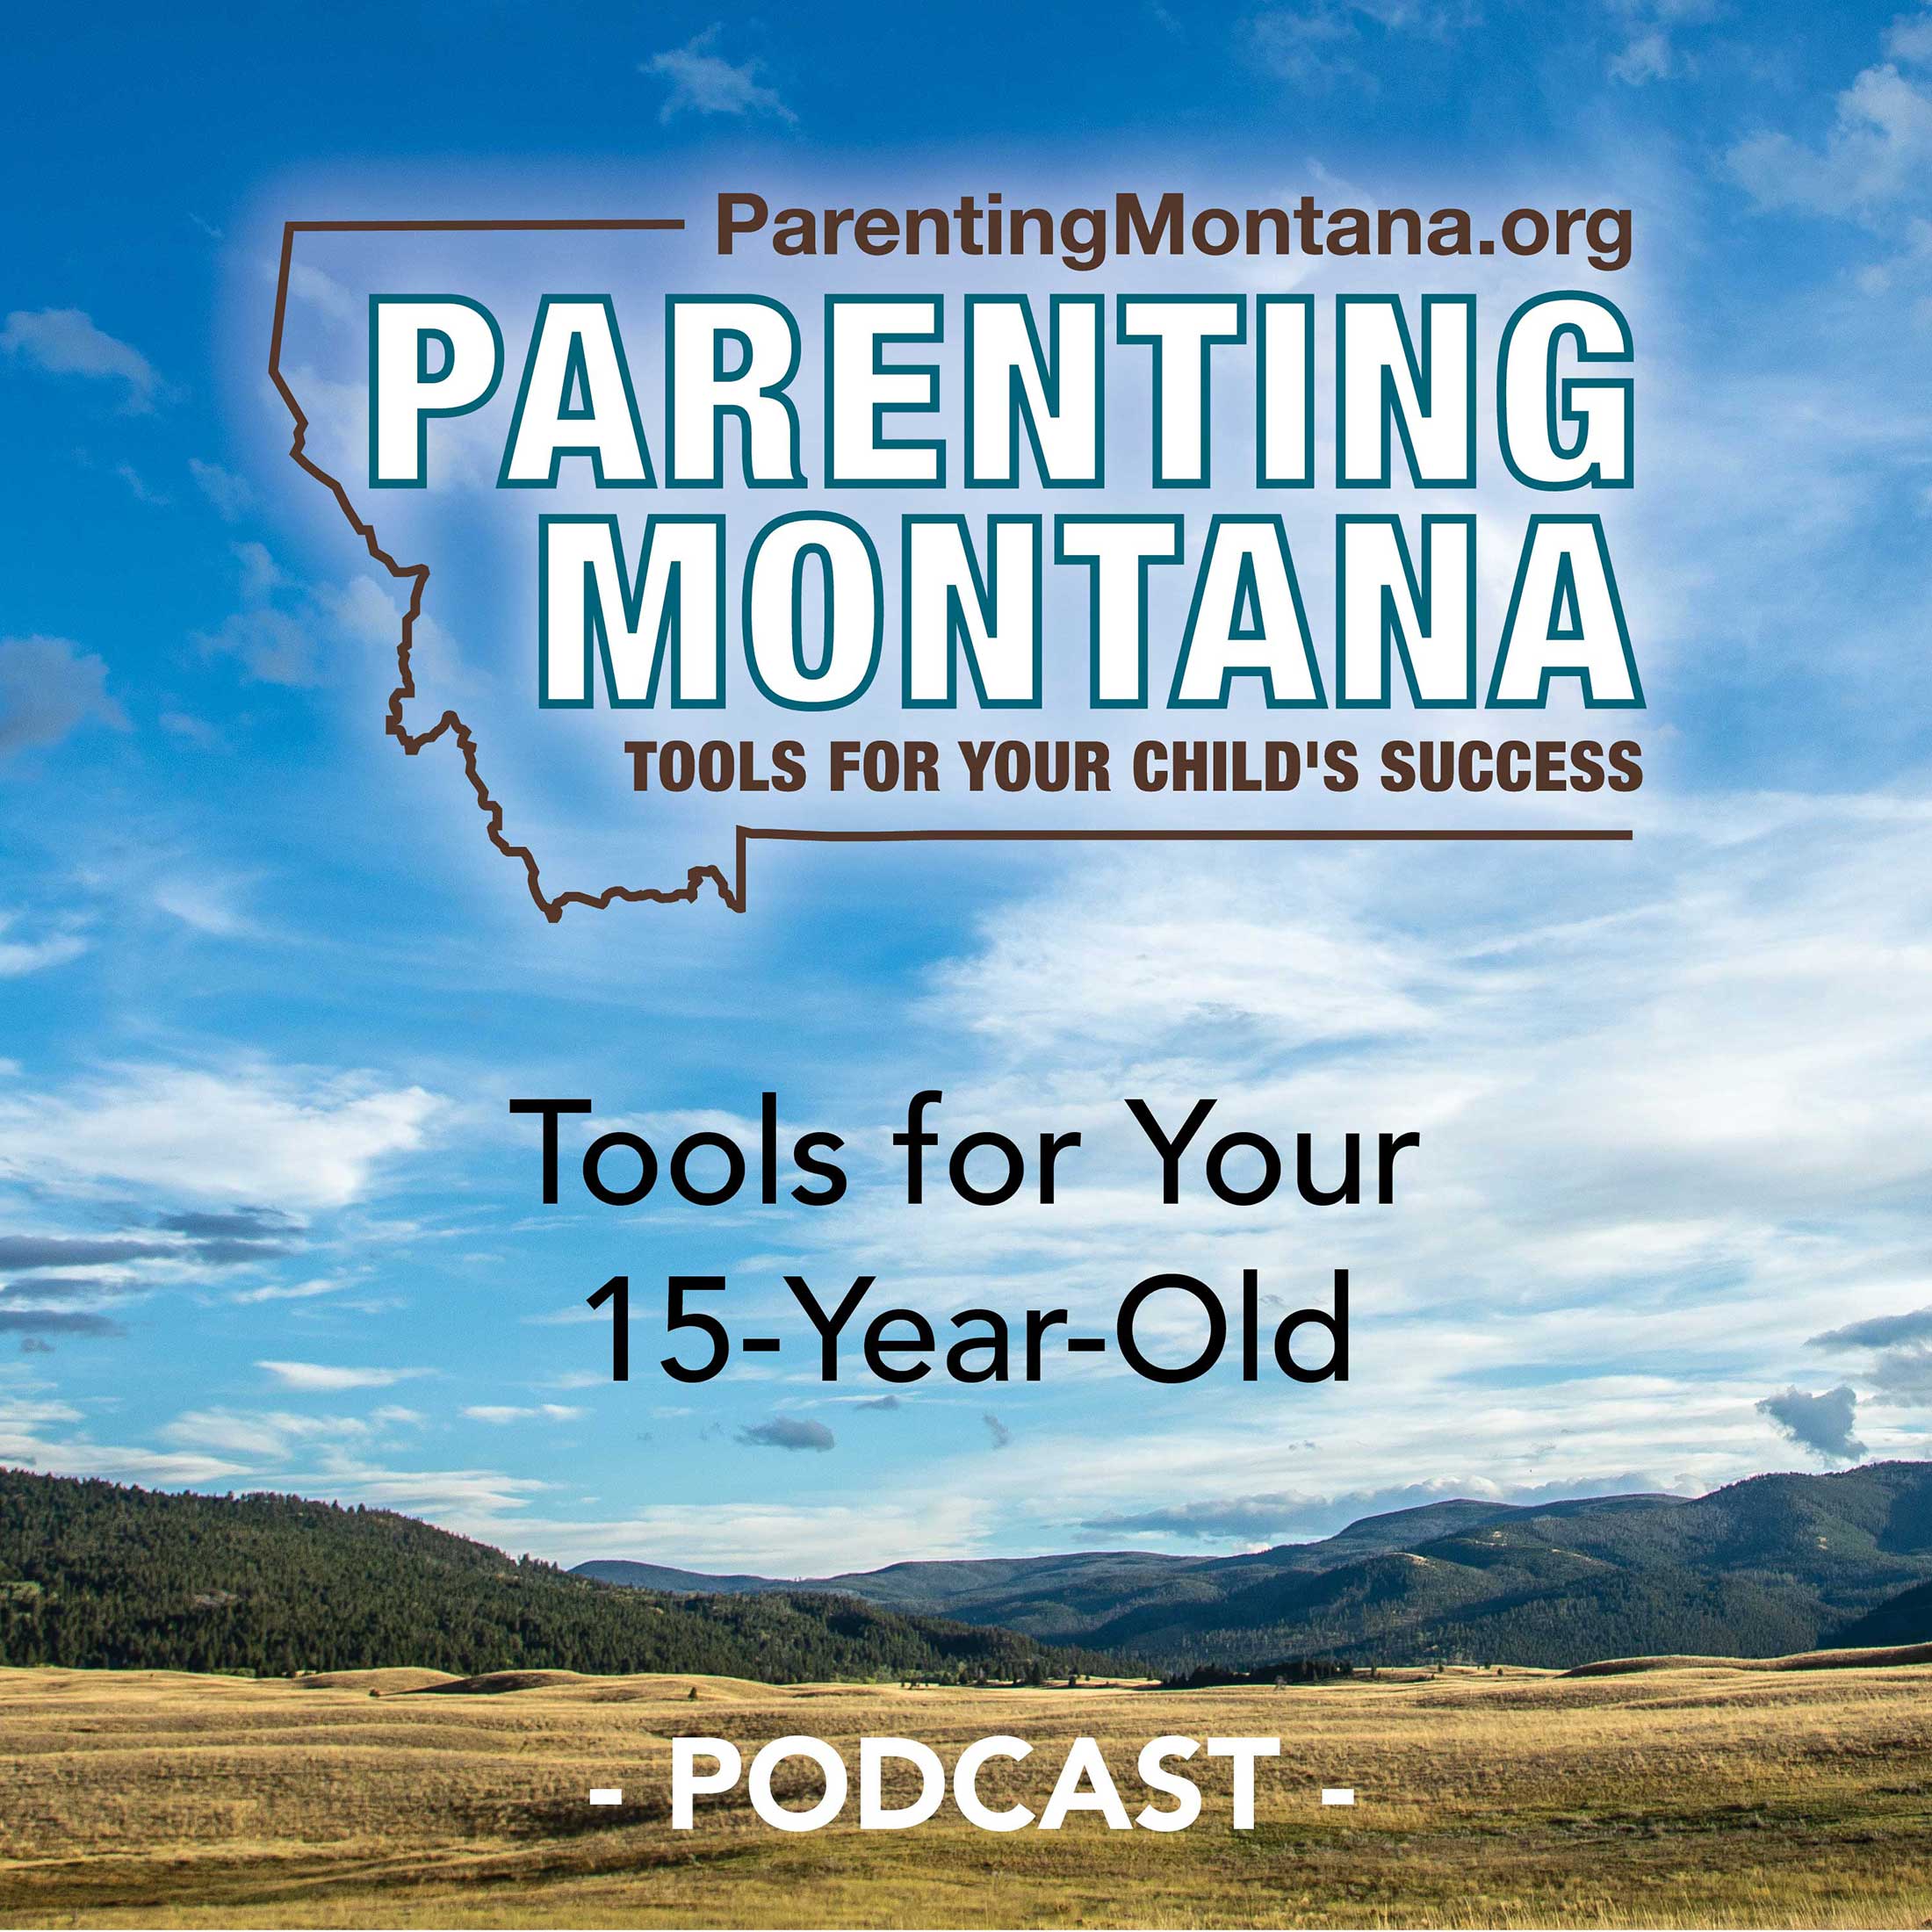 Artwork for podcast 15-Year-Old Parenting Montana Tools